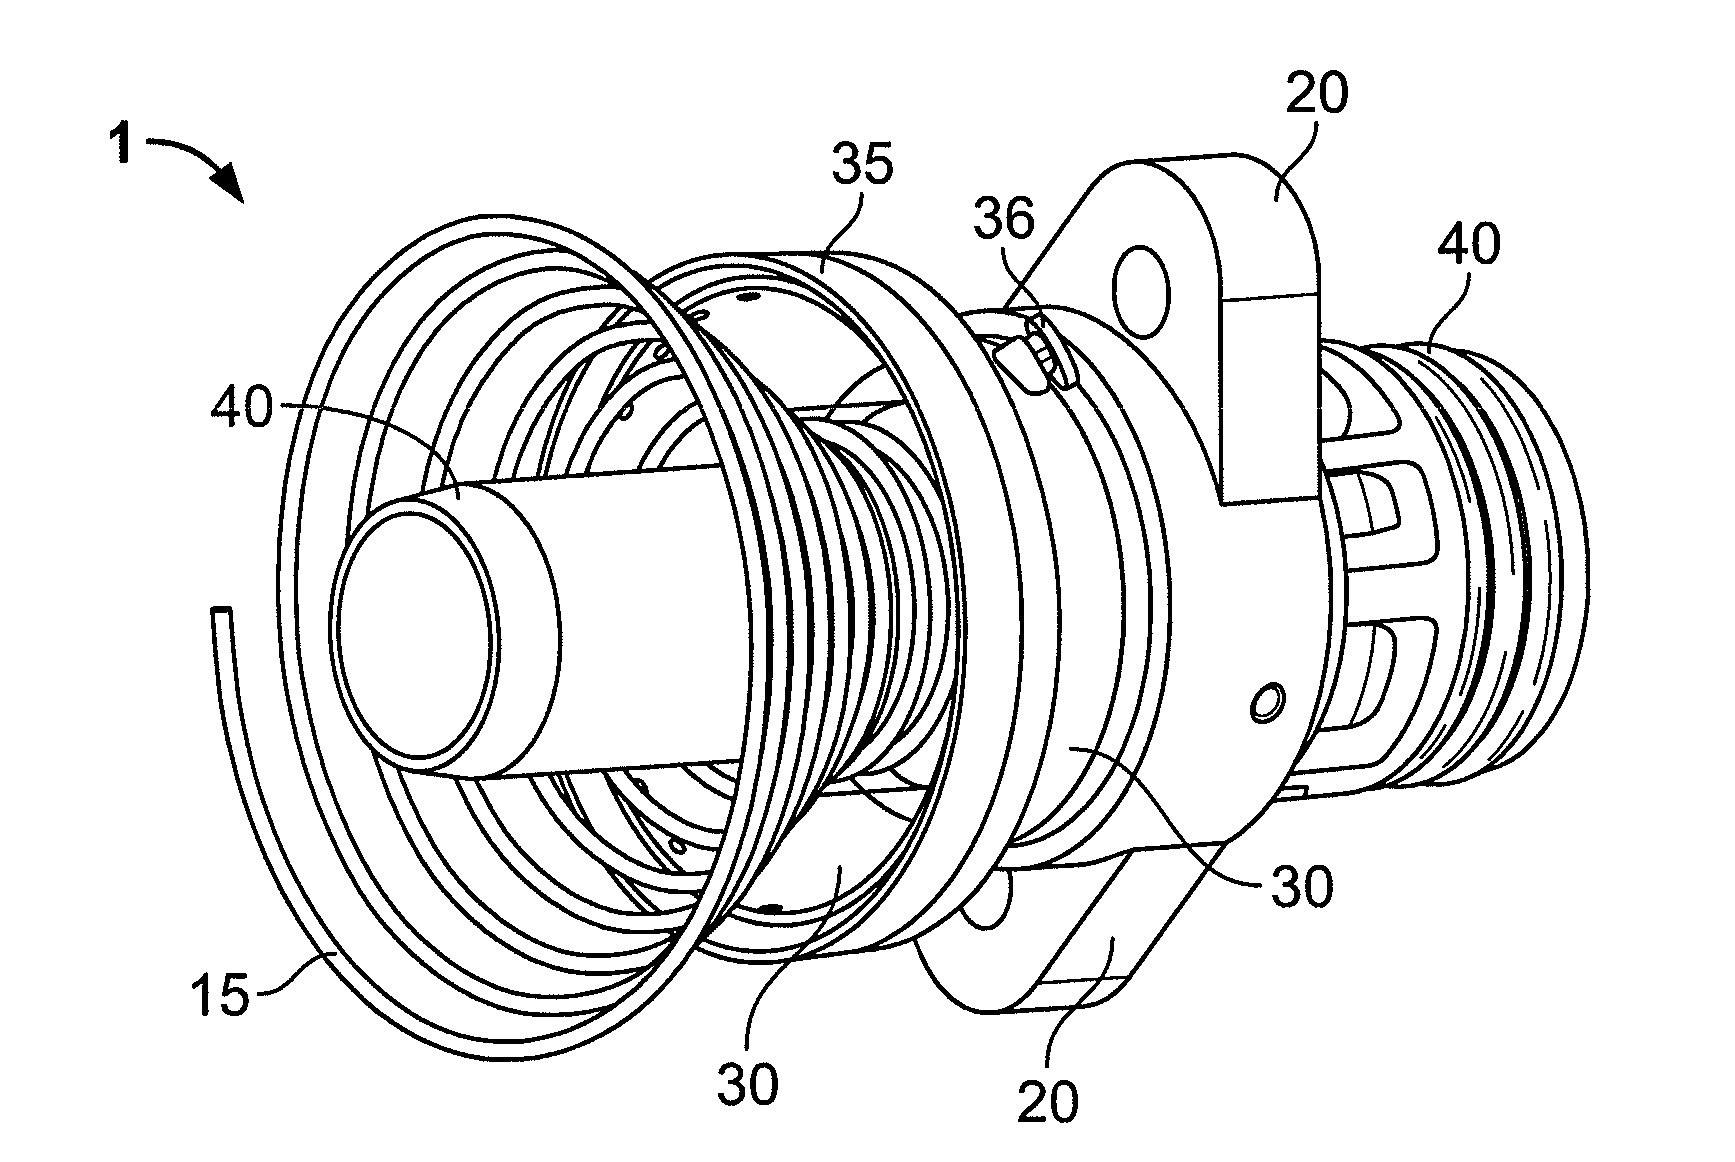 Conduit device and system for implanting a conduit device in a tissue wall